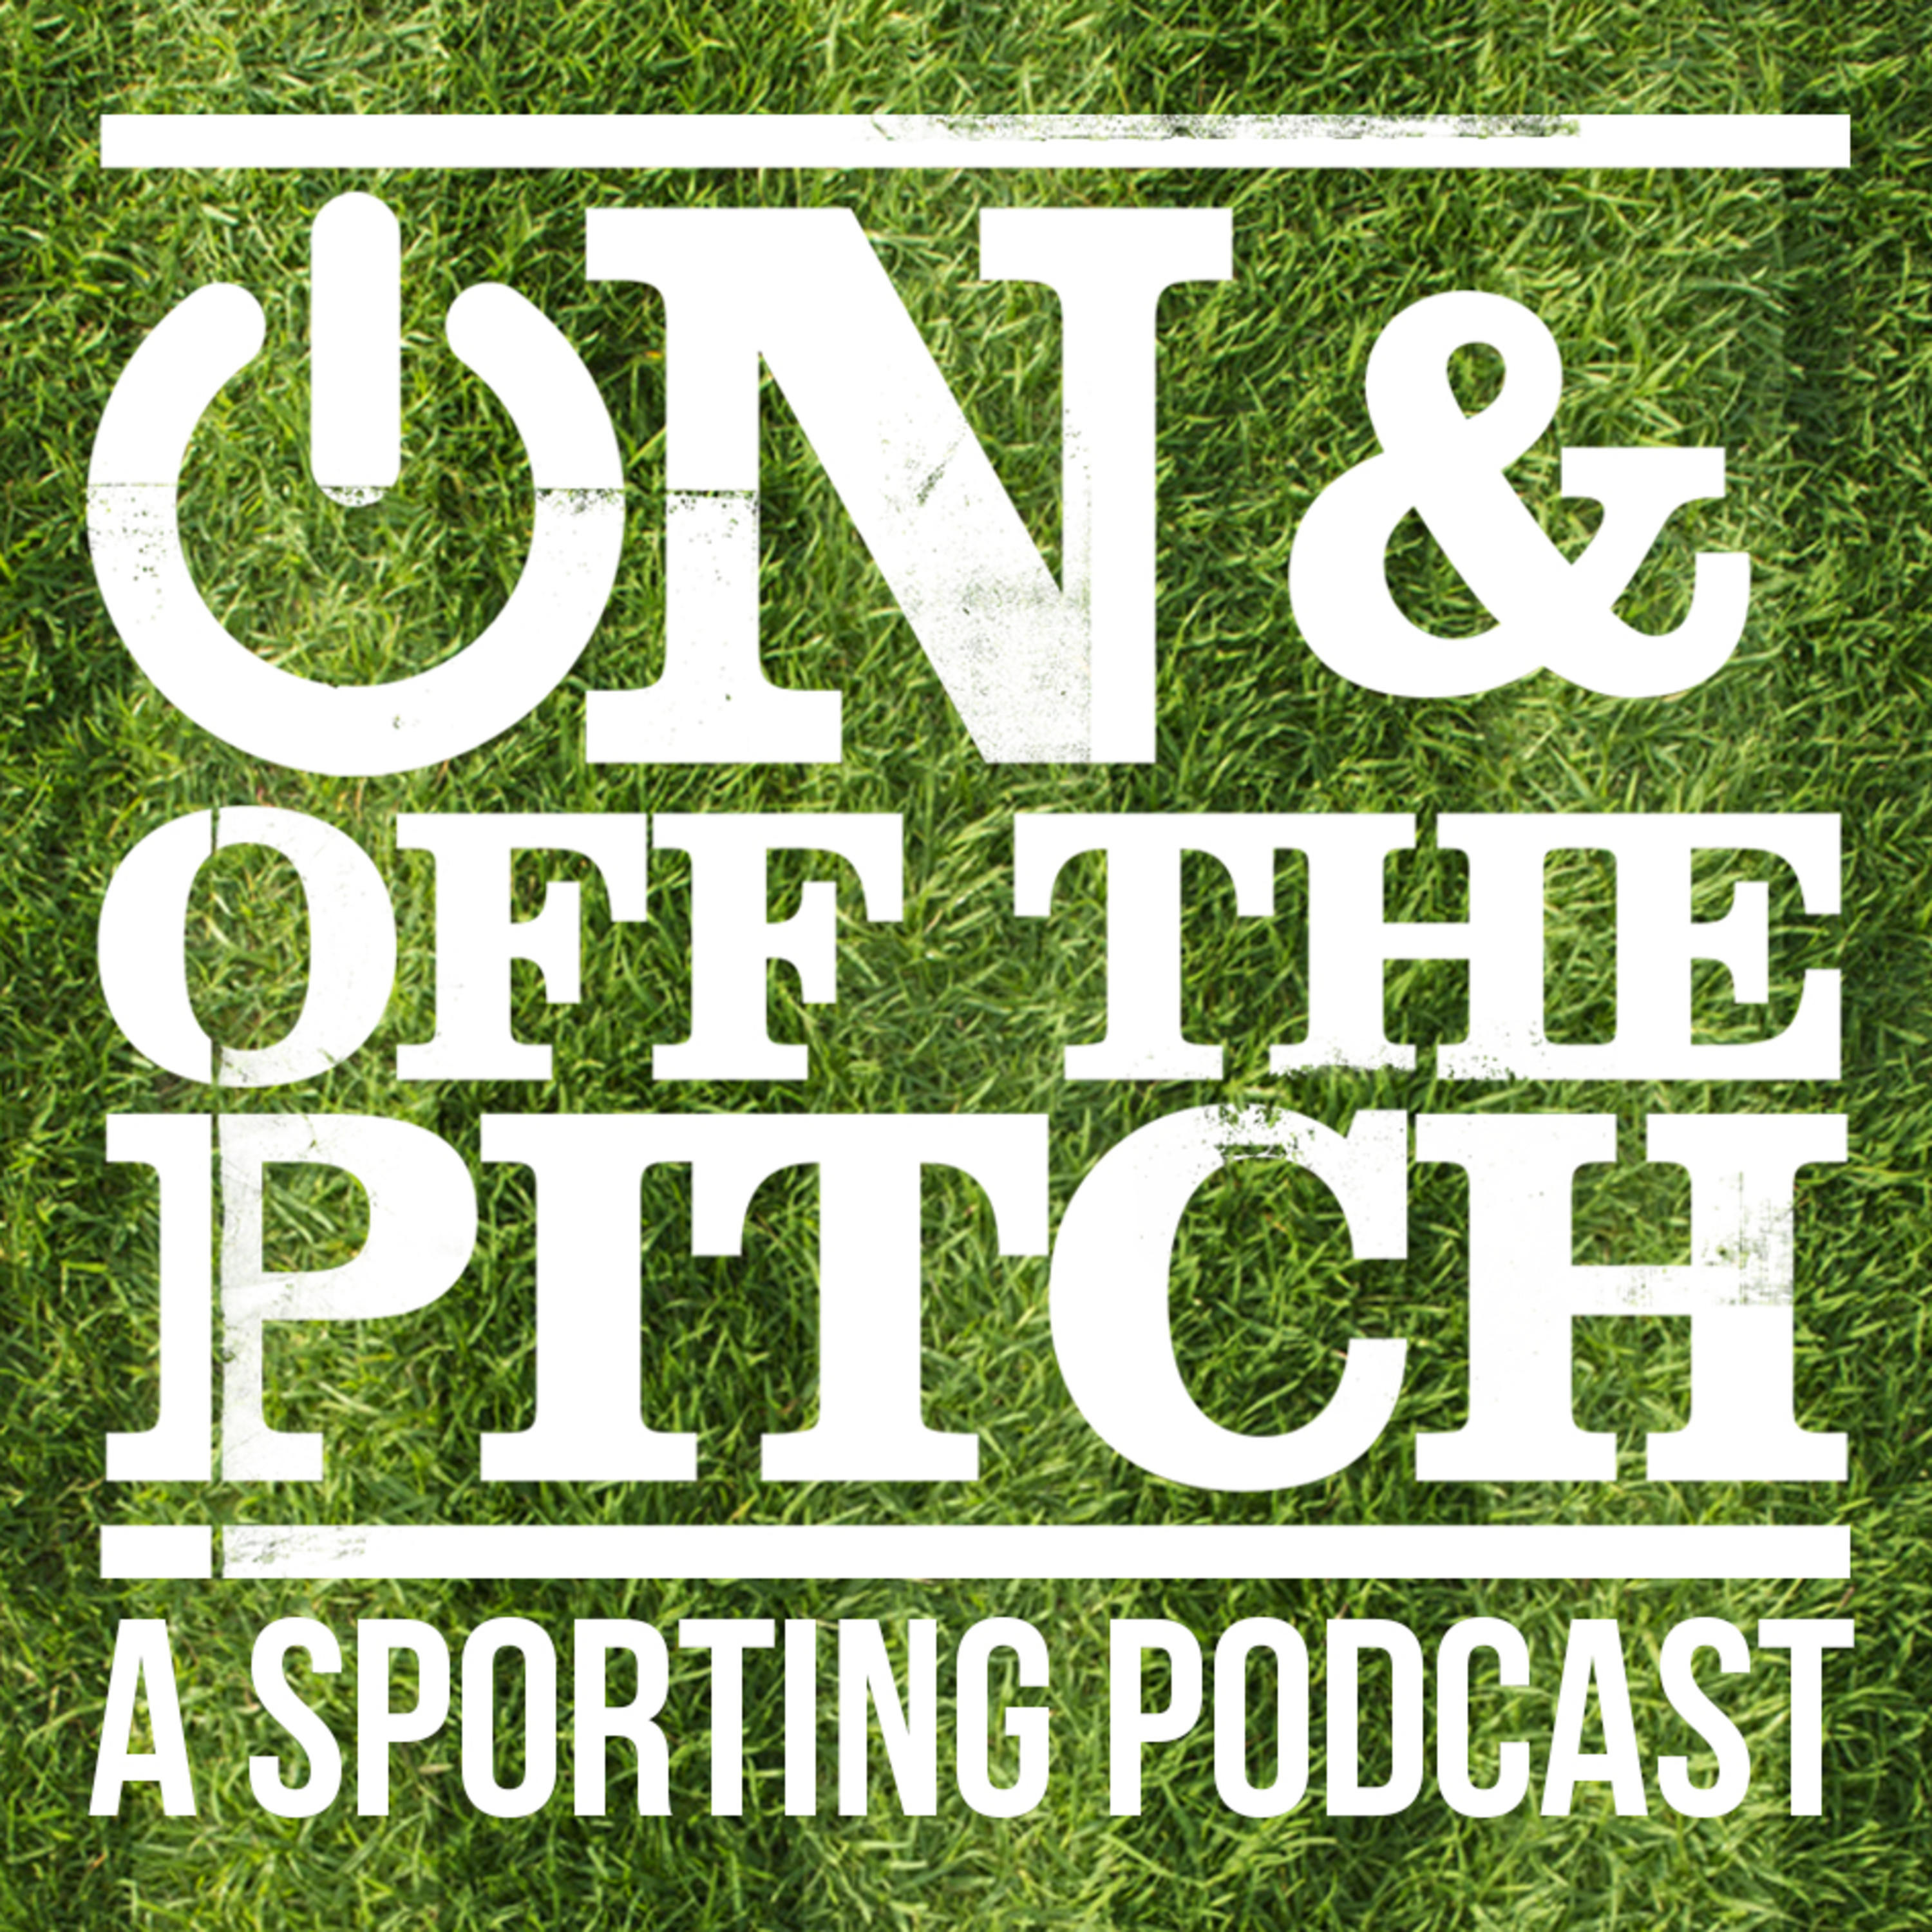 On And Off The Pitch Podcast